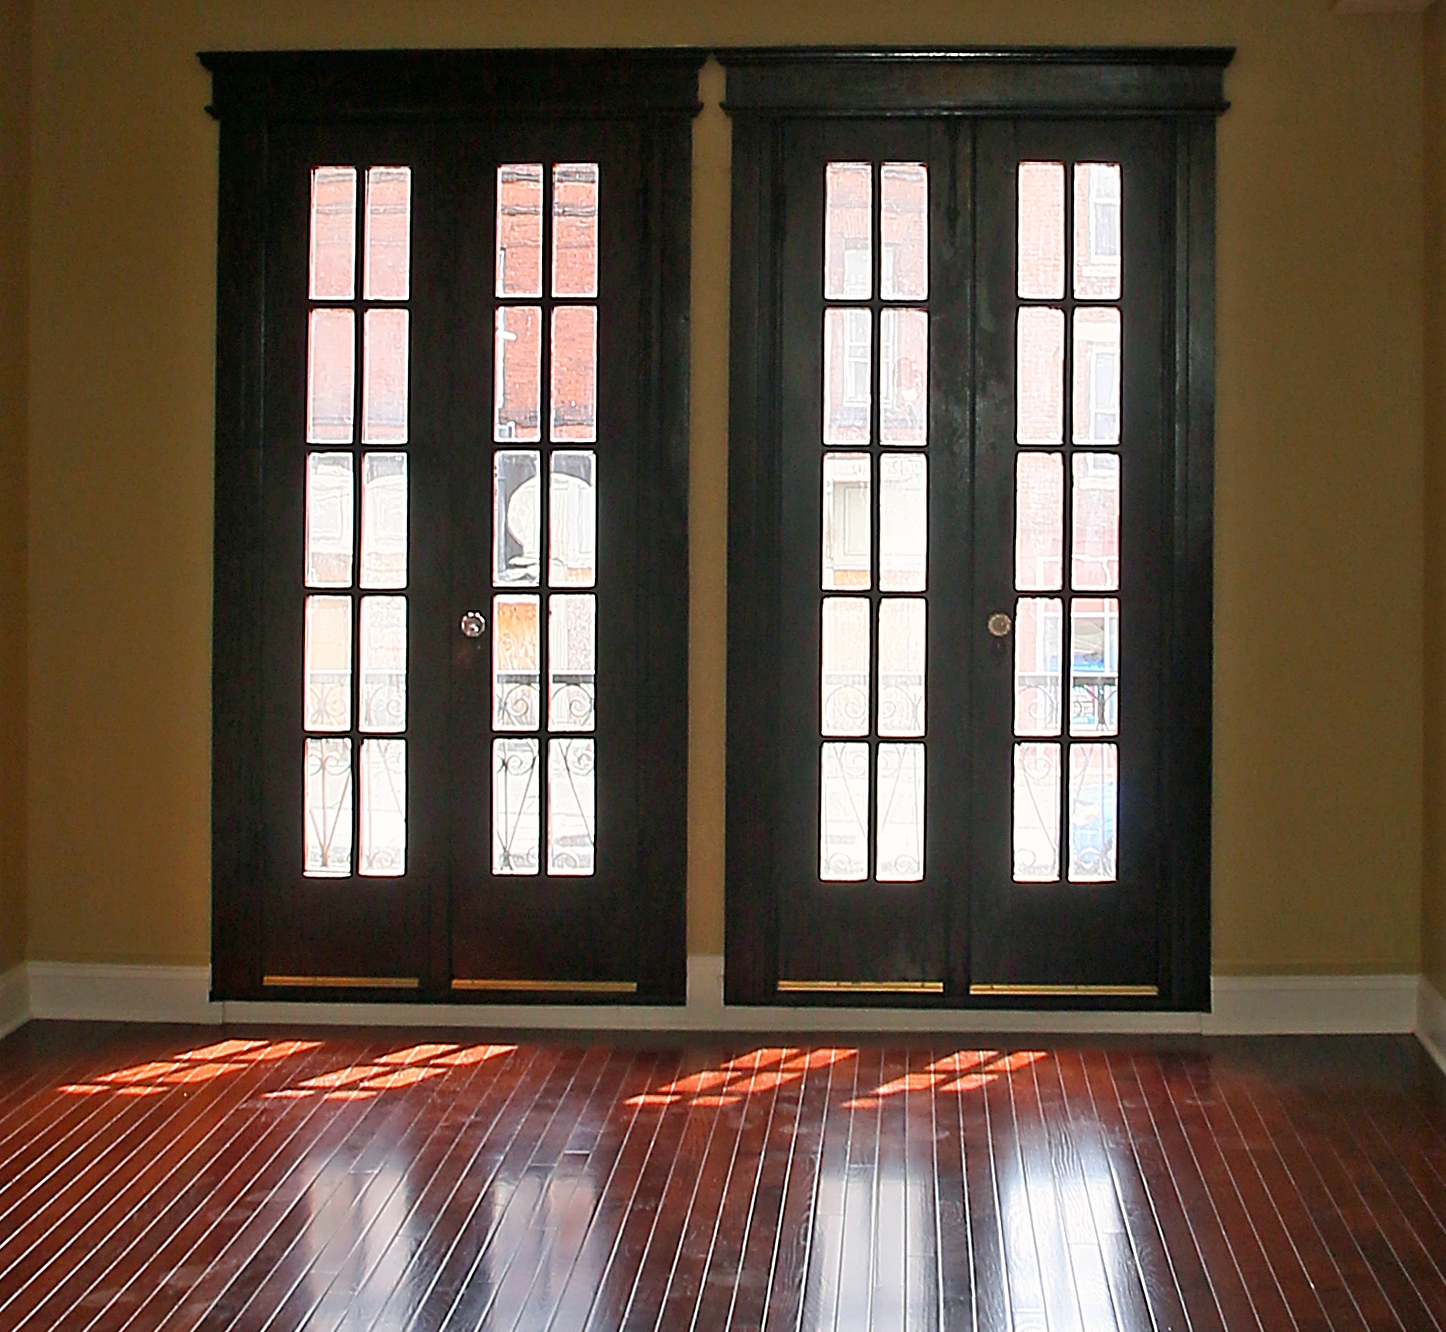 French doors on the second floor bring light into the living room at 537-539 S. Salina St.